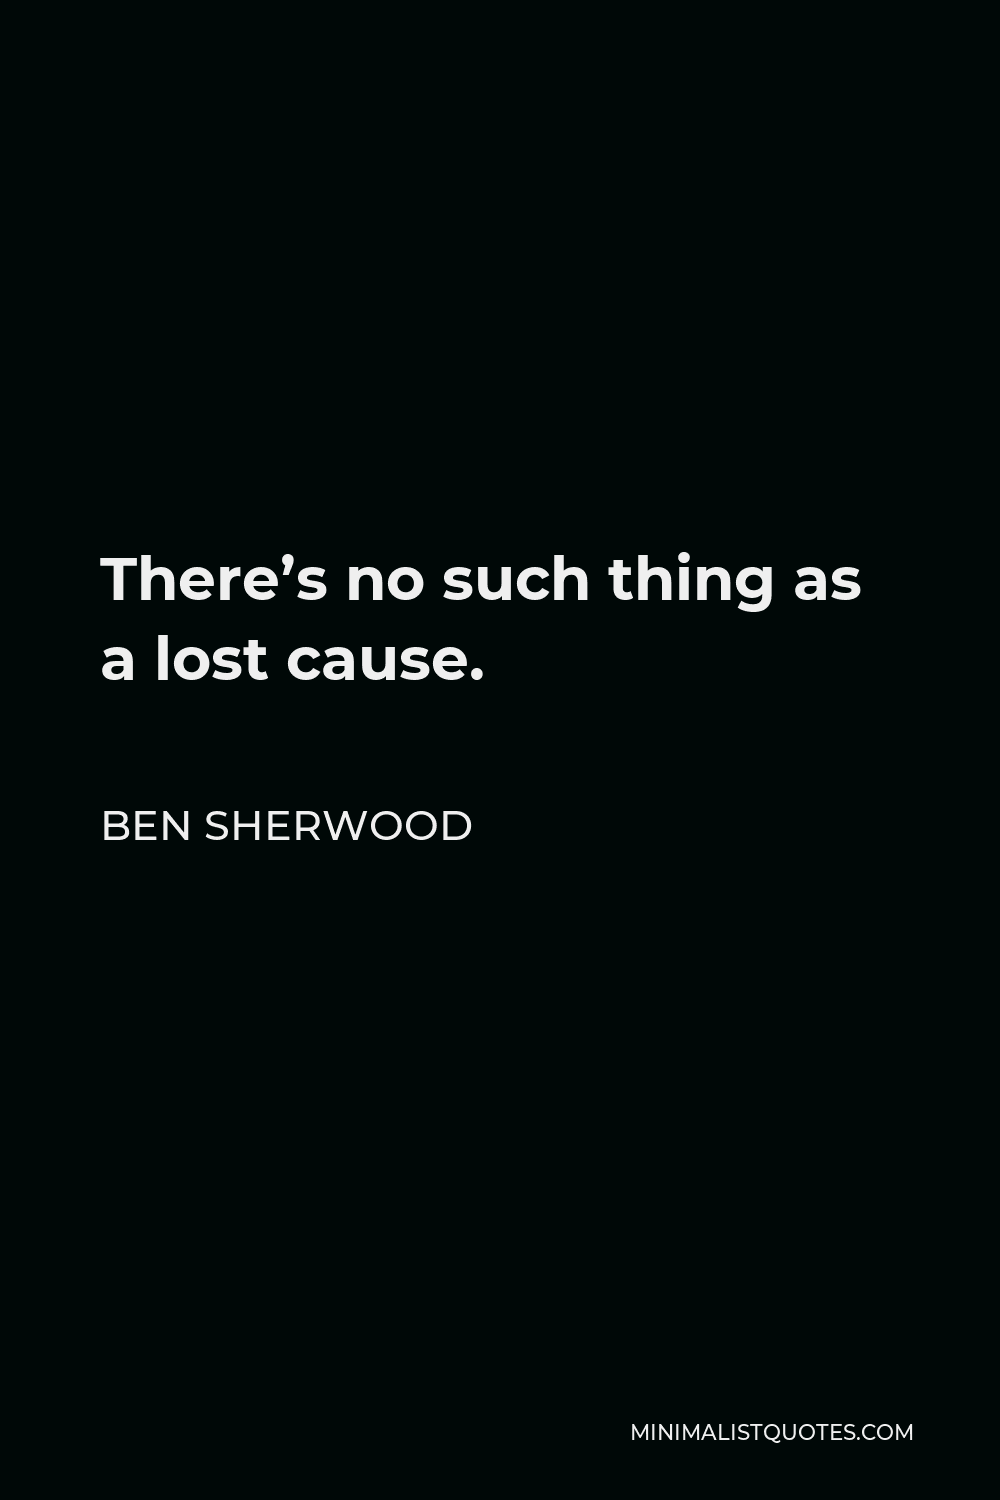 Ben Sherwood Quote - There’s no such thing as a lost cause.